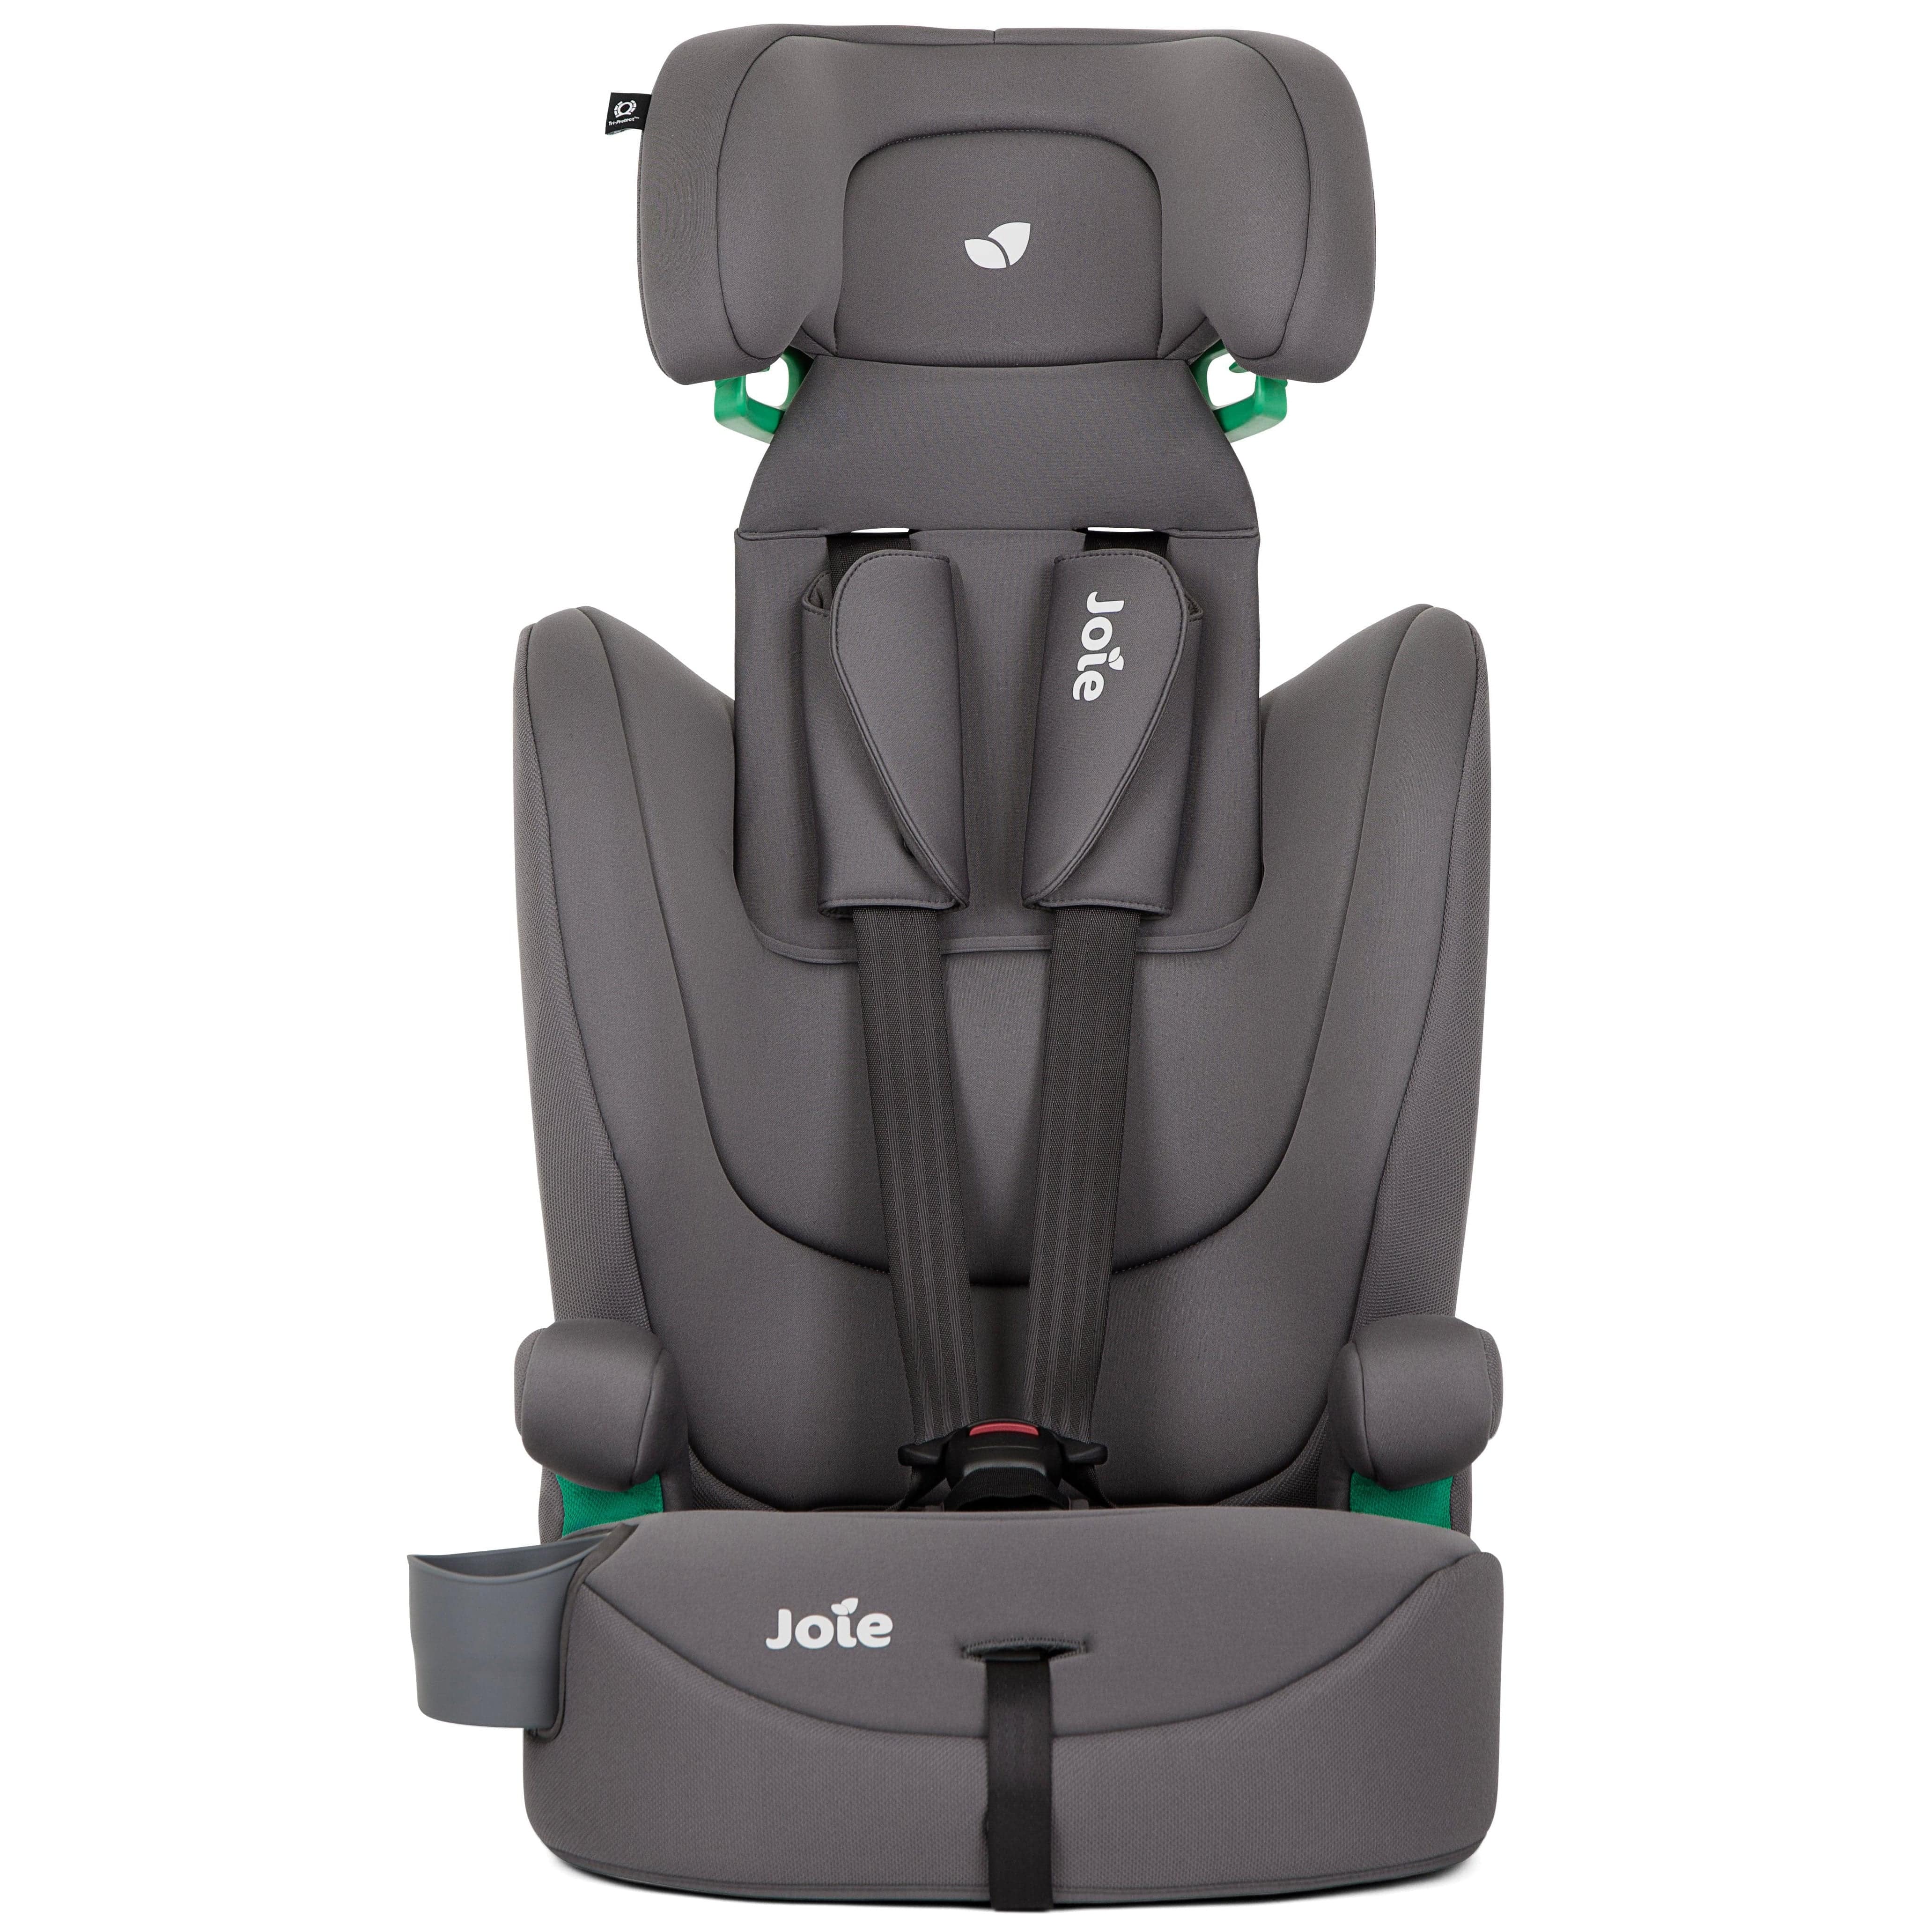 Joie Elevate R129 1/2/3 Car Seat in Thunder Toddler Car Seats C2216AATHD000 5056080616520